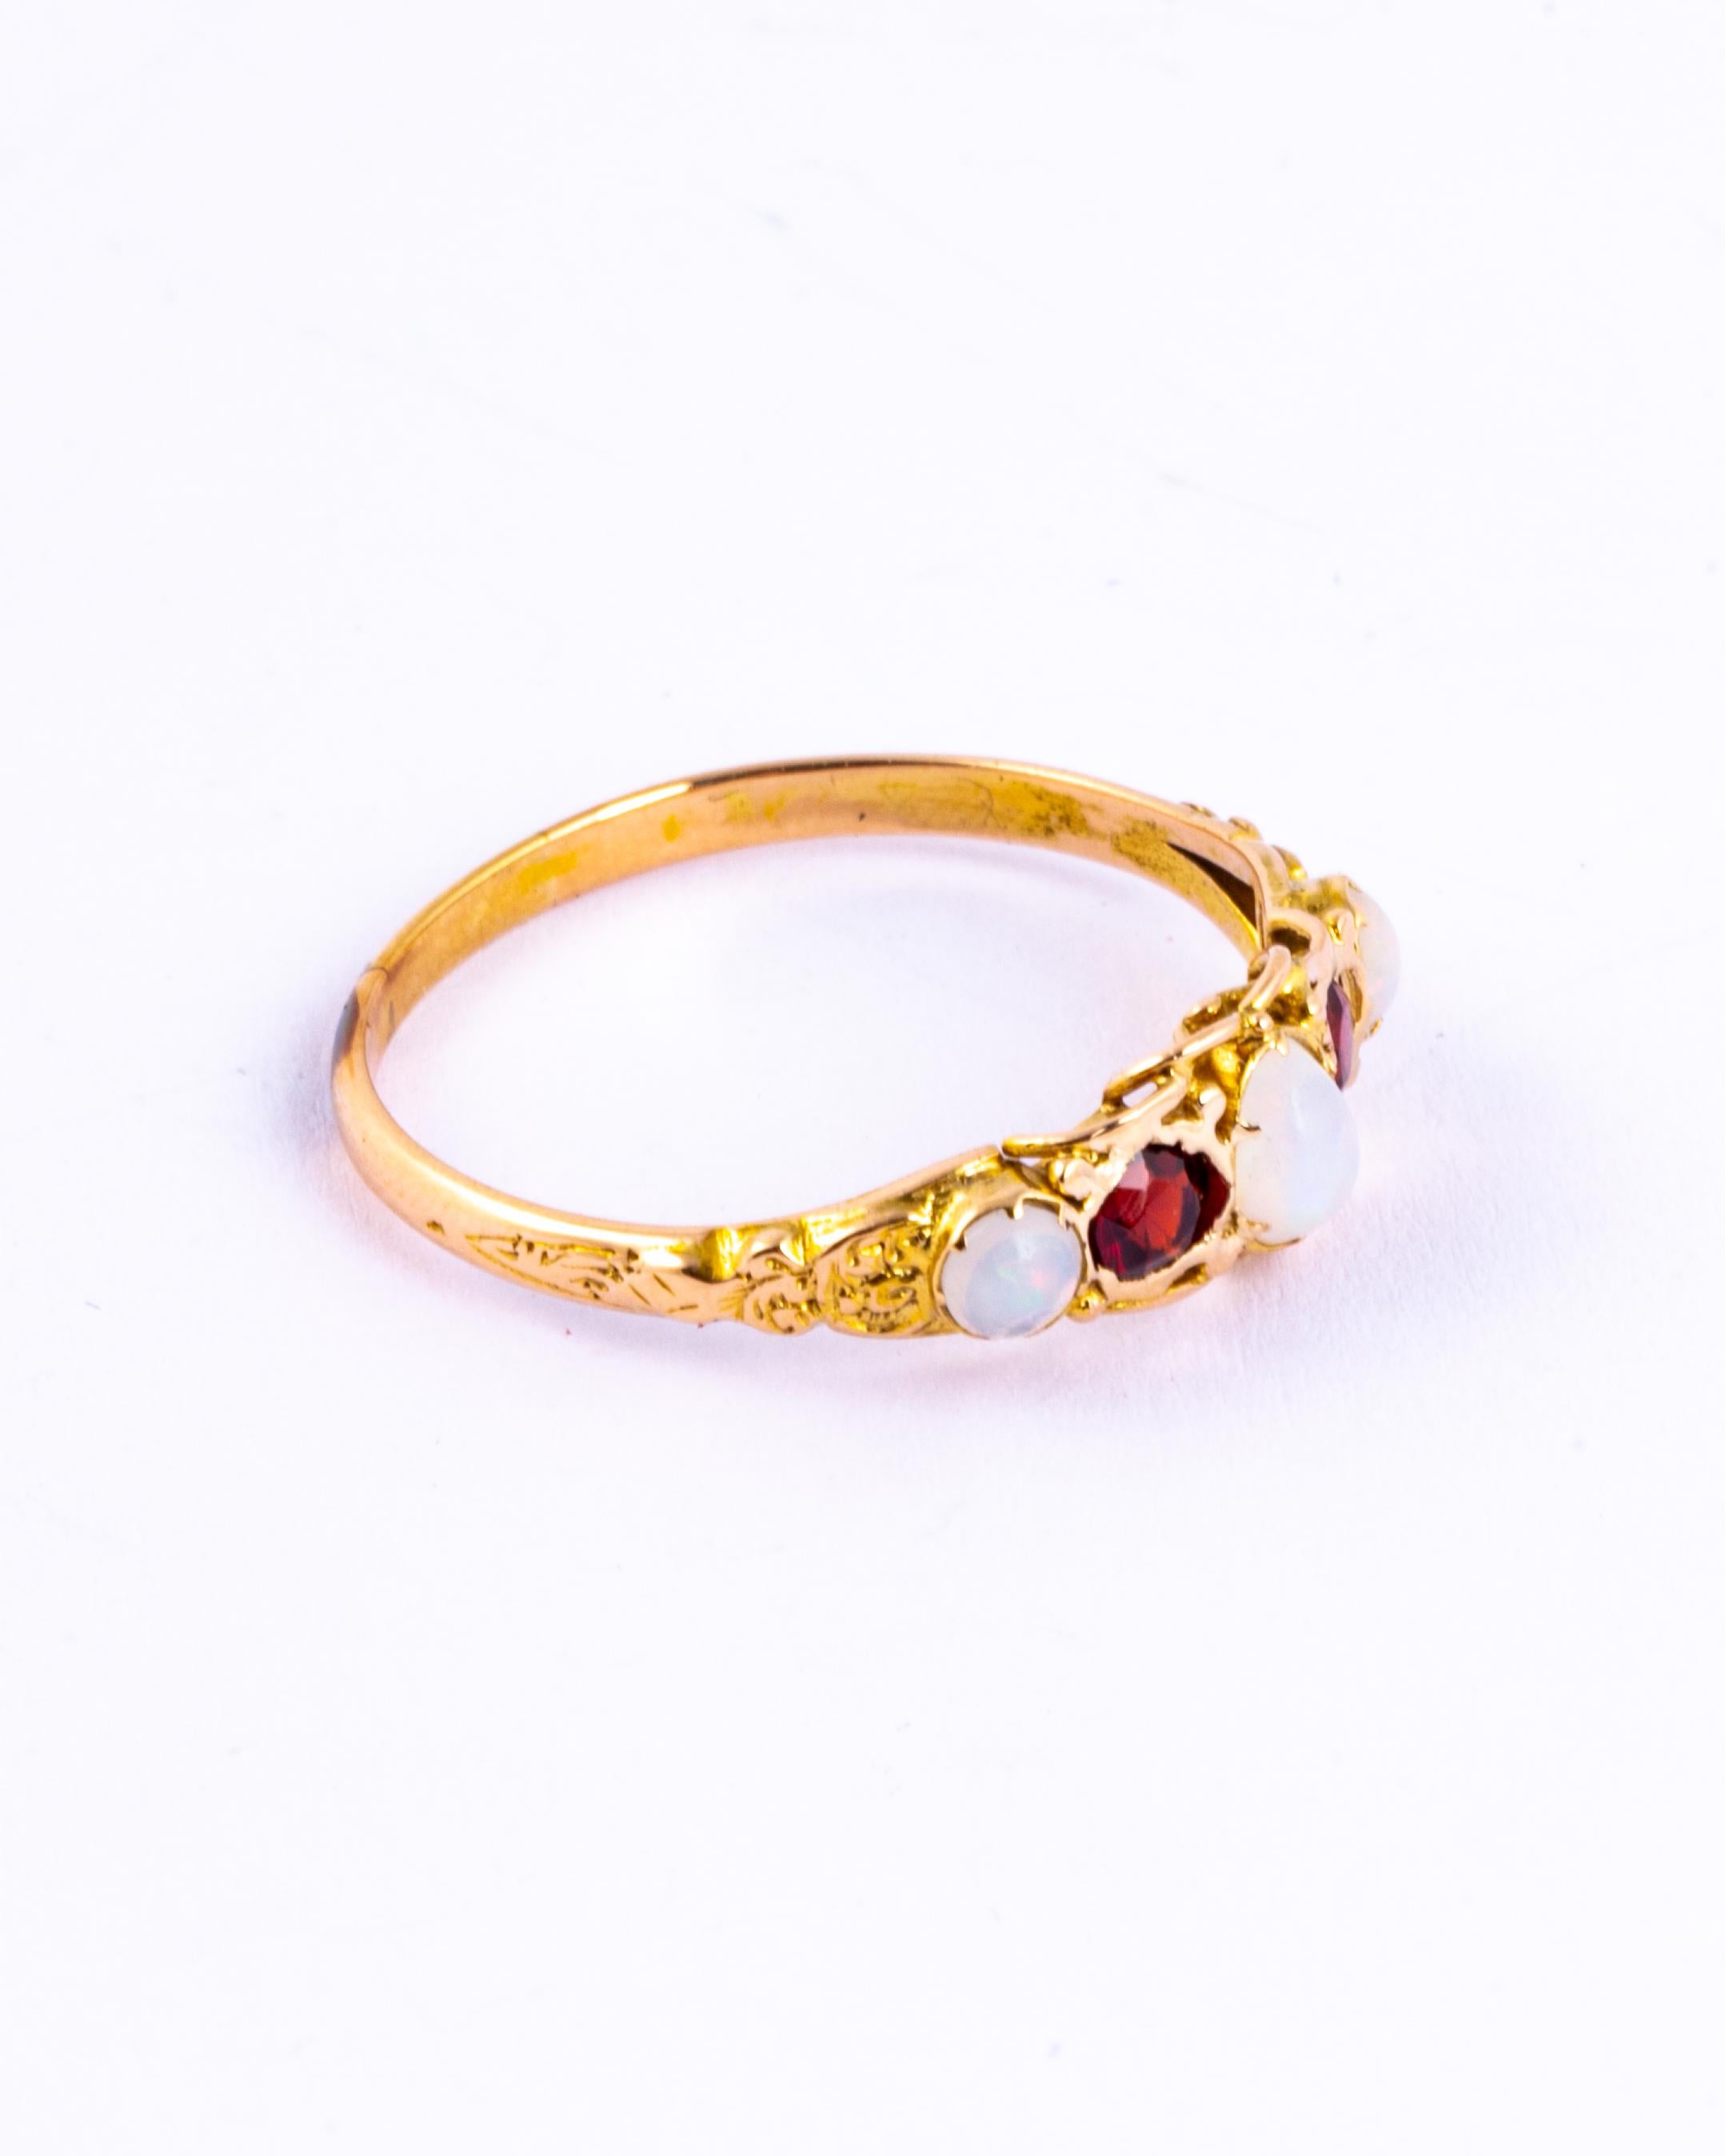 Either side of the glittering garnets in this ring are gorgeous and colourful opals. The garnets total 30pts and the opals total approx 45pts. The setting and shoulders of this ring are so decorative and modelled in 9carat gold. 

Ring Size: T or 9